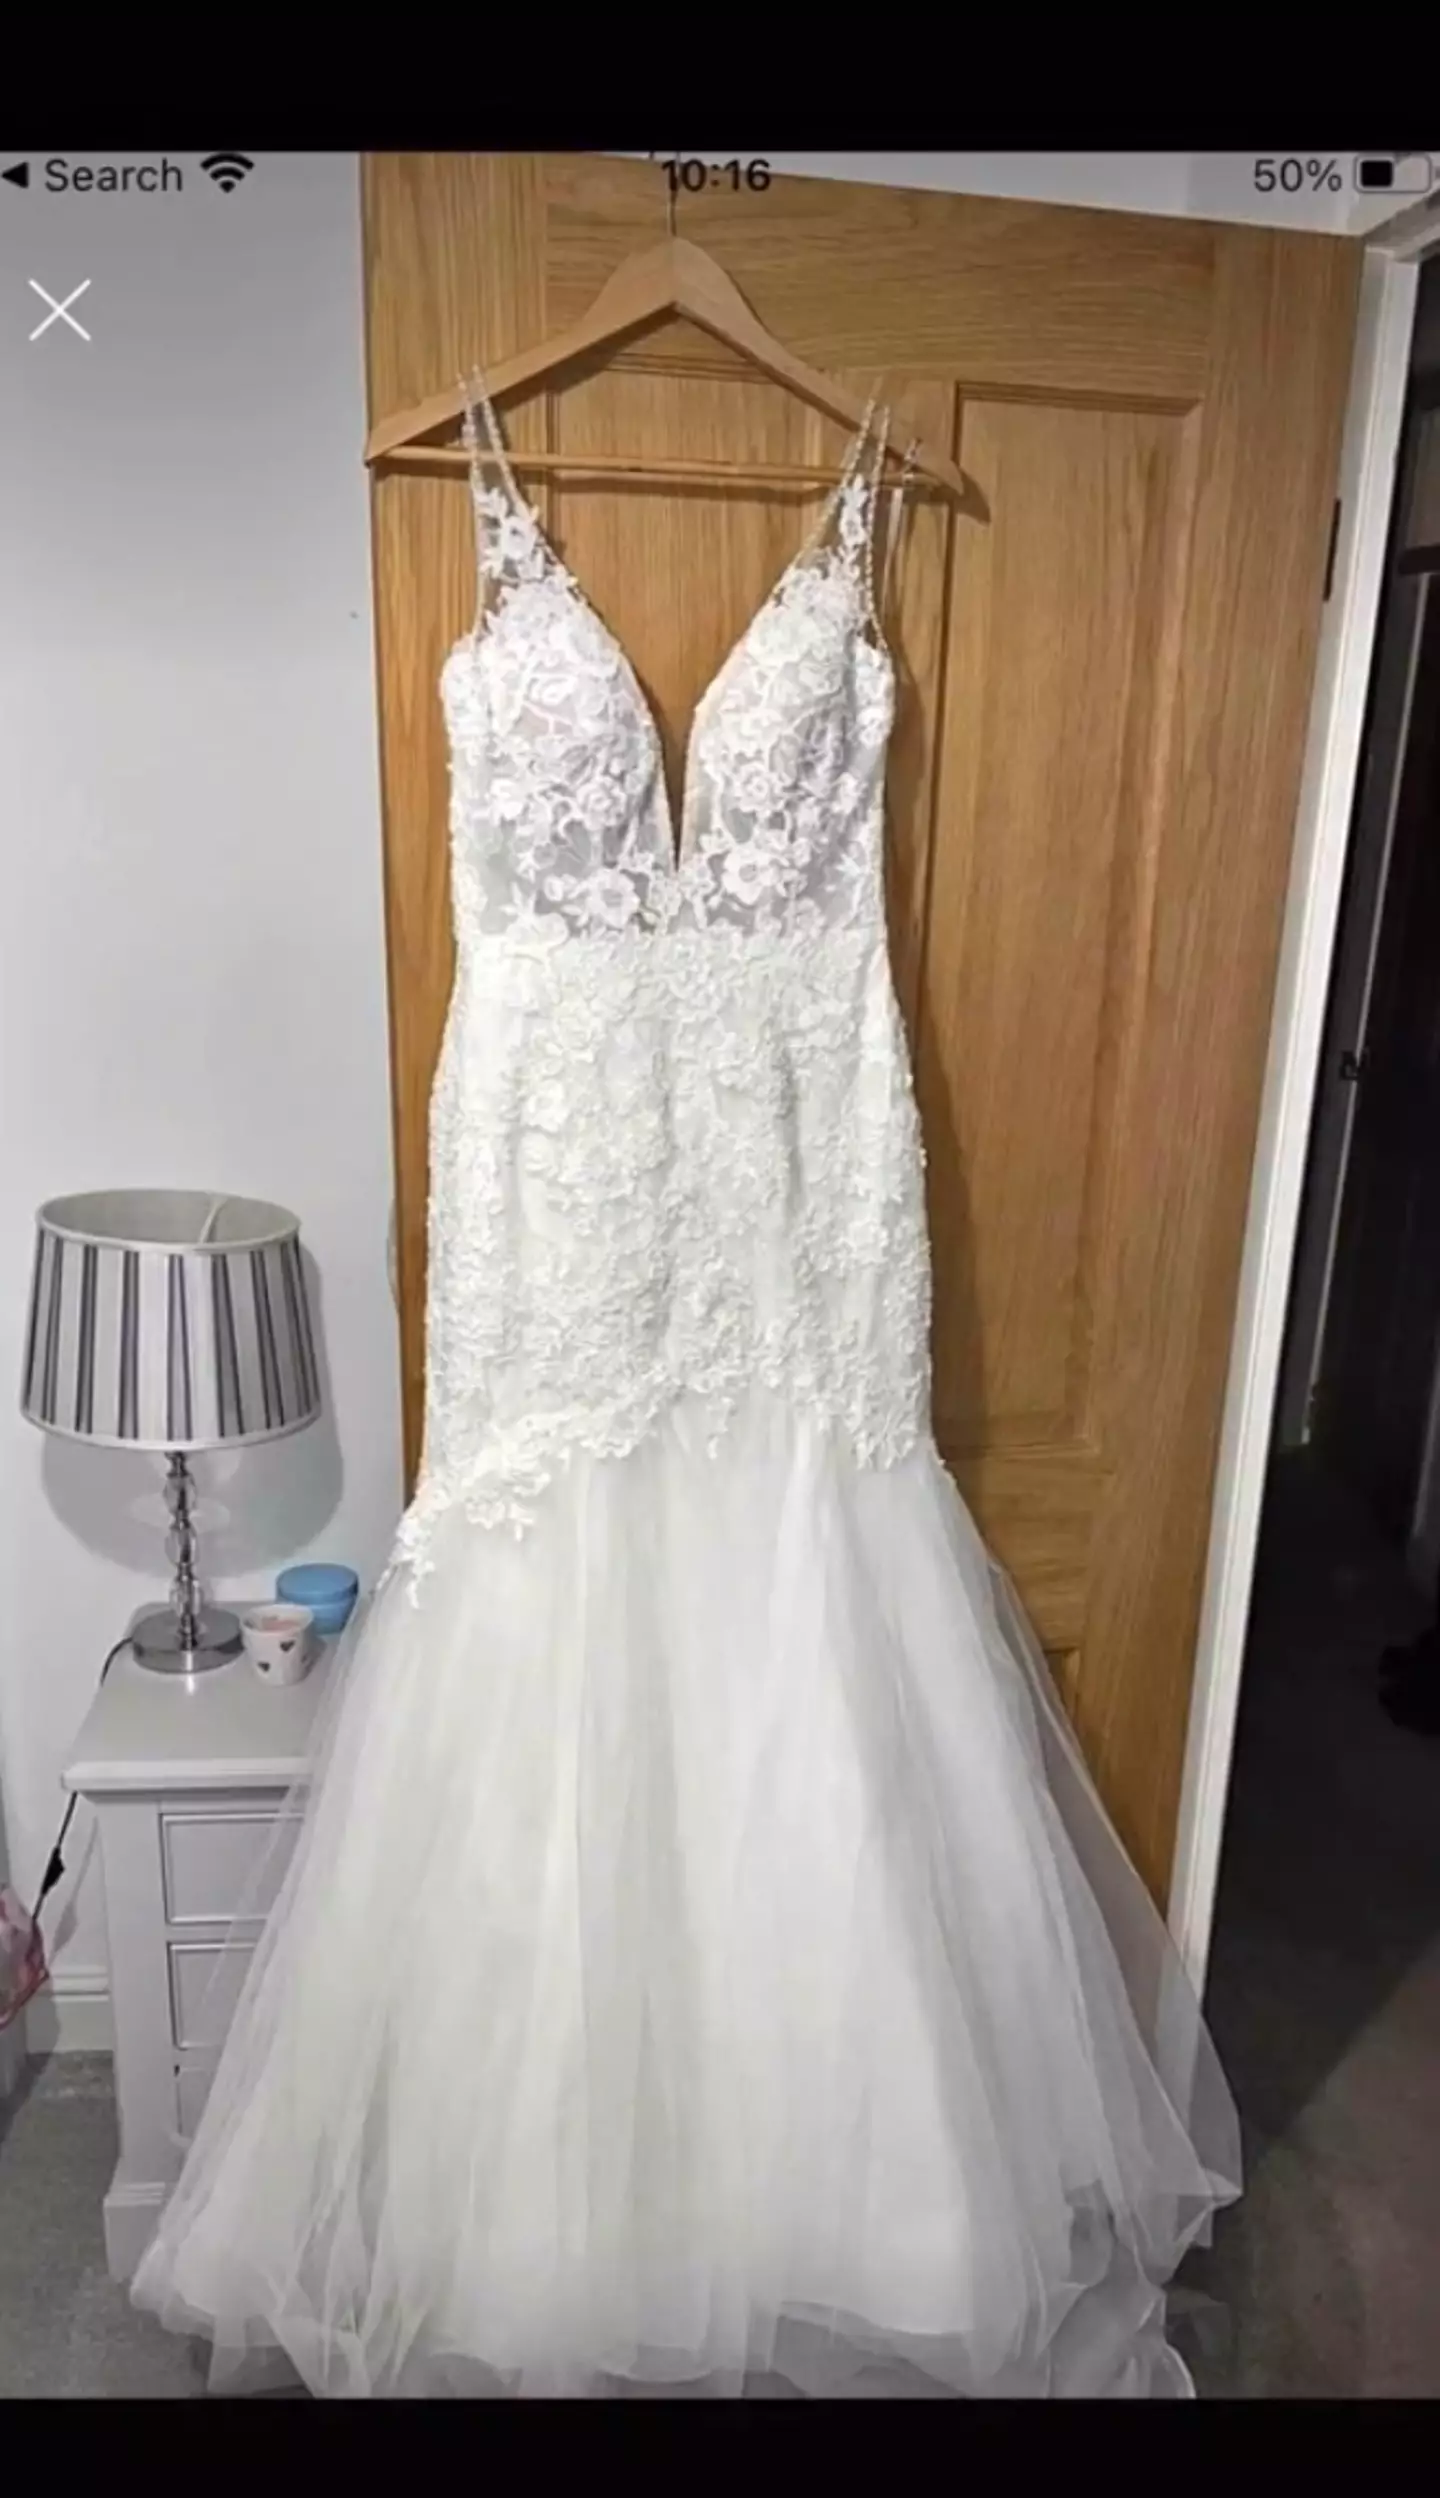 This beautiful wedding dress has been listed for just £5 with a savage description. (